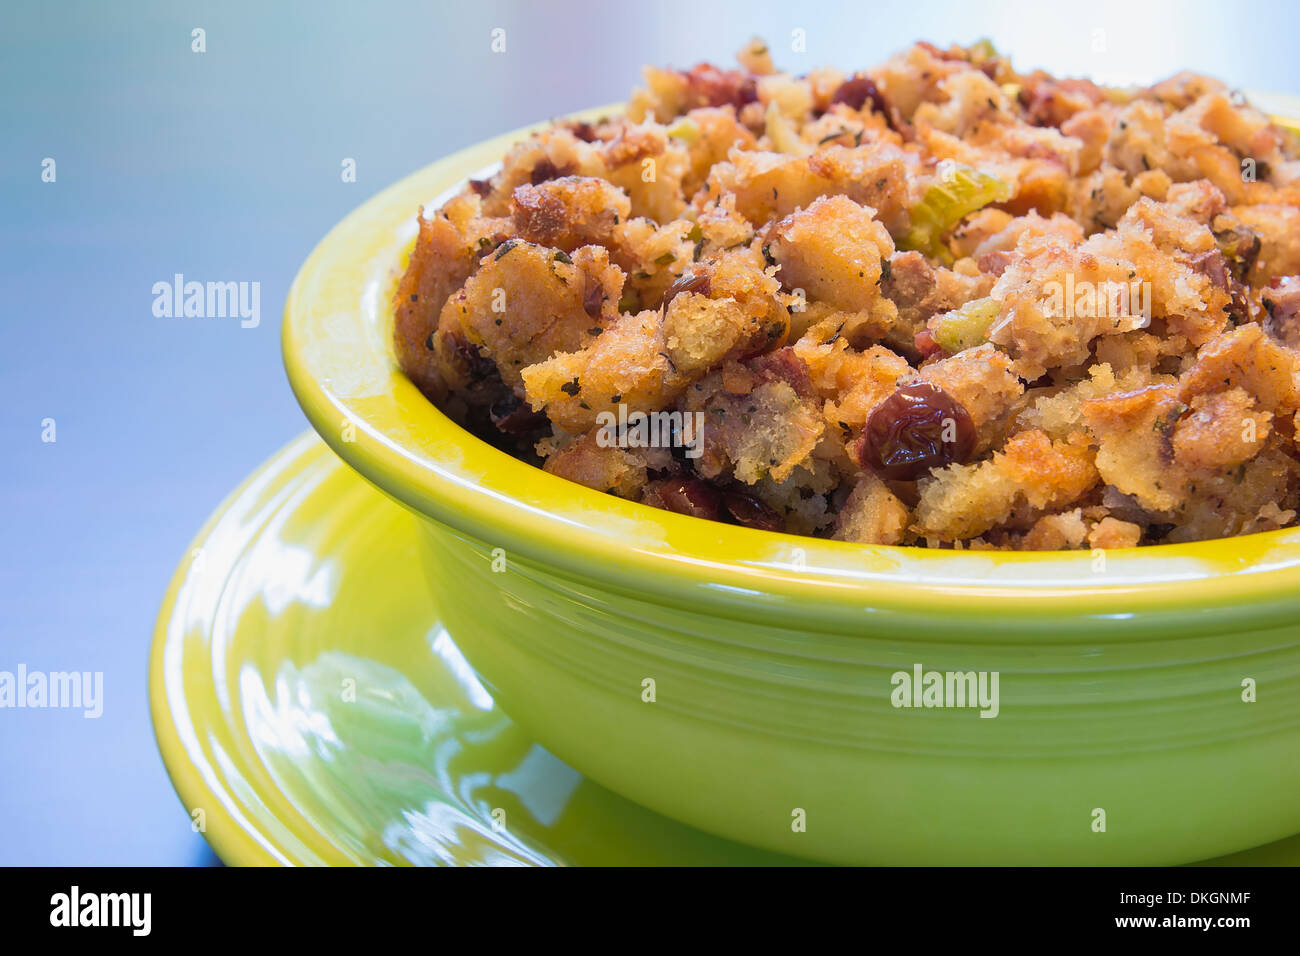 Thanksgiving Day Turkey Stuffing with Corn Bread Celery Cranberry in Green Bowl on Wood Table Closeup Stock Photo